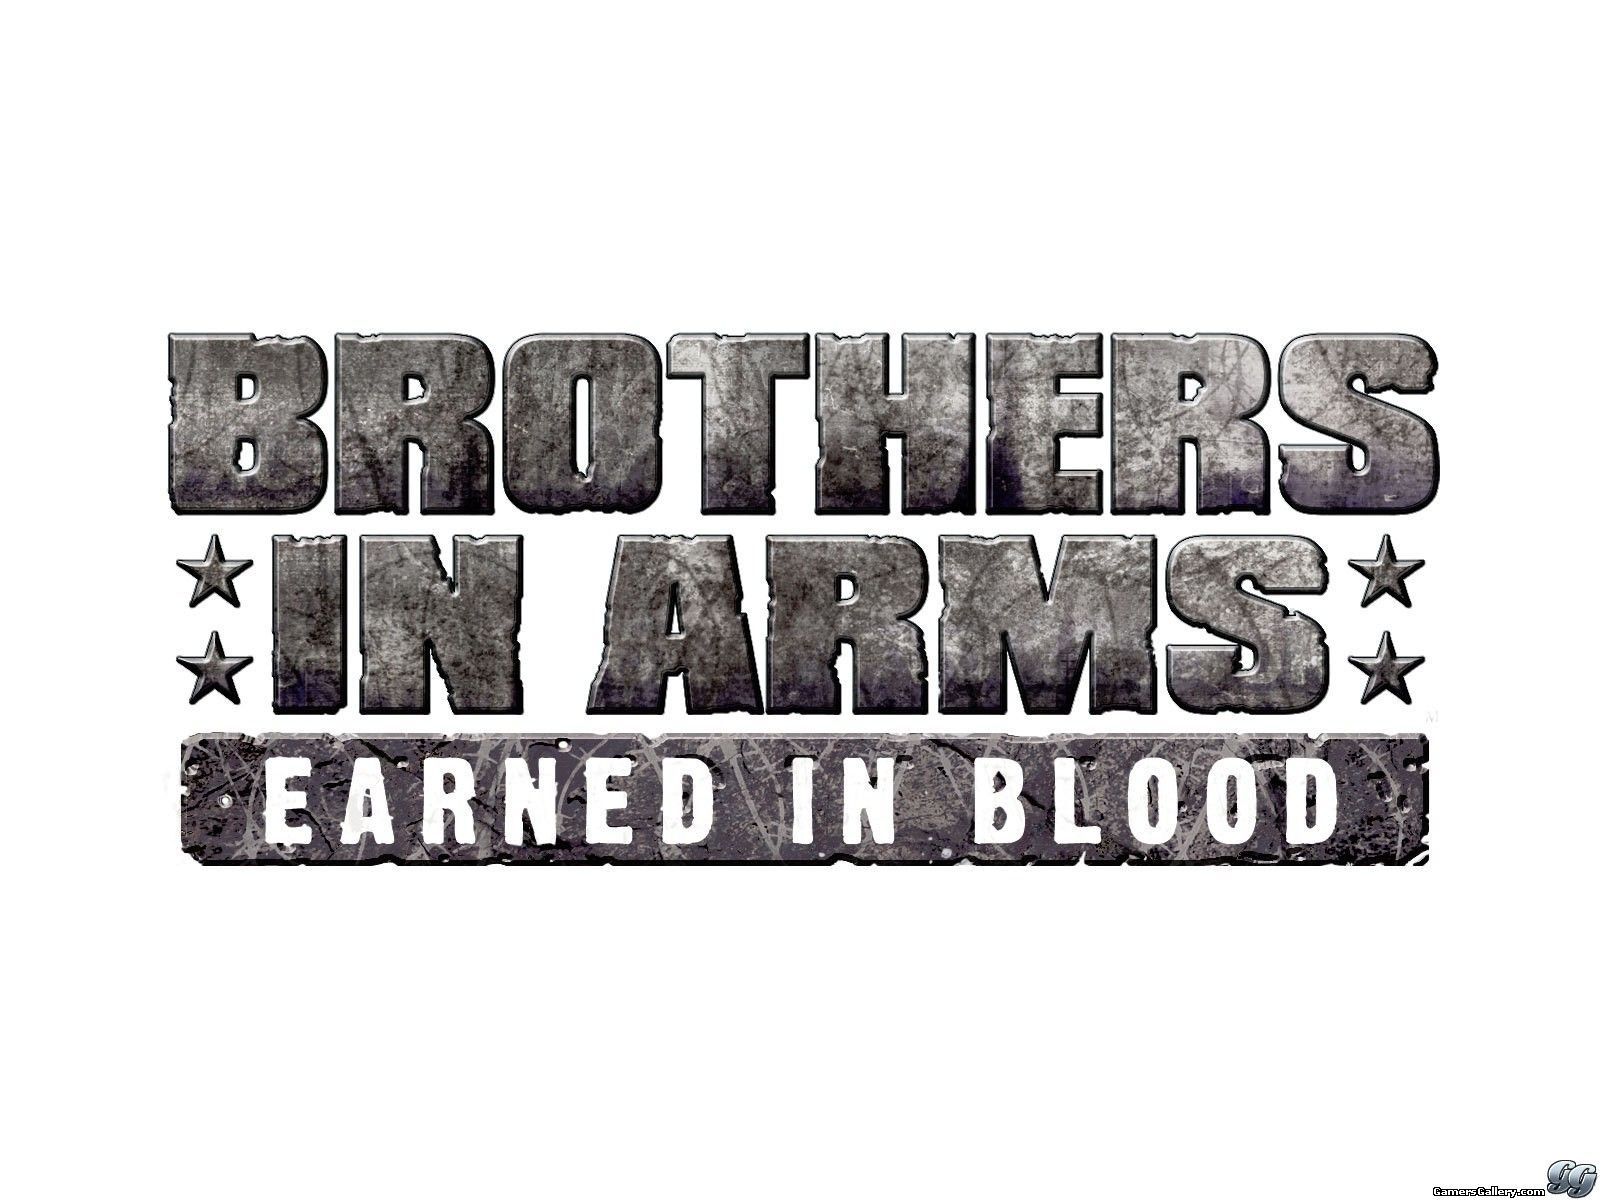 Gamers Gallery in Arms: Earned In Blood Exclusive